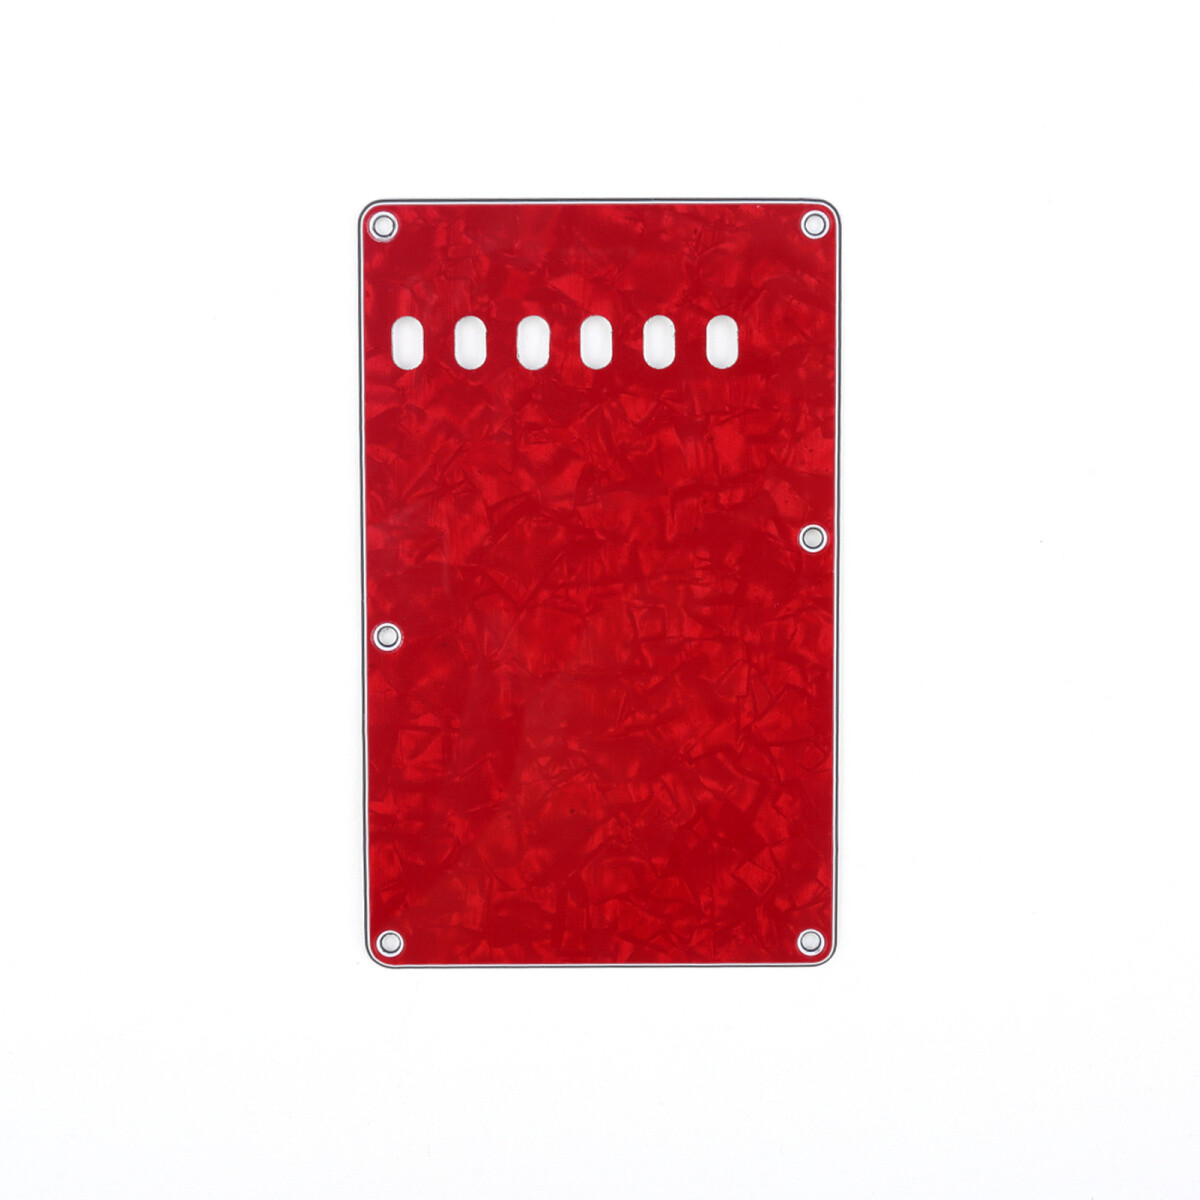 Brio Pearl Red Vintage Style Back Plate Tremolo Cover 4 ply - US/Mexican Fender®Strat® Fit